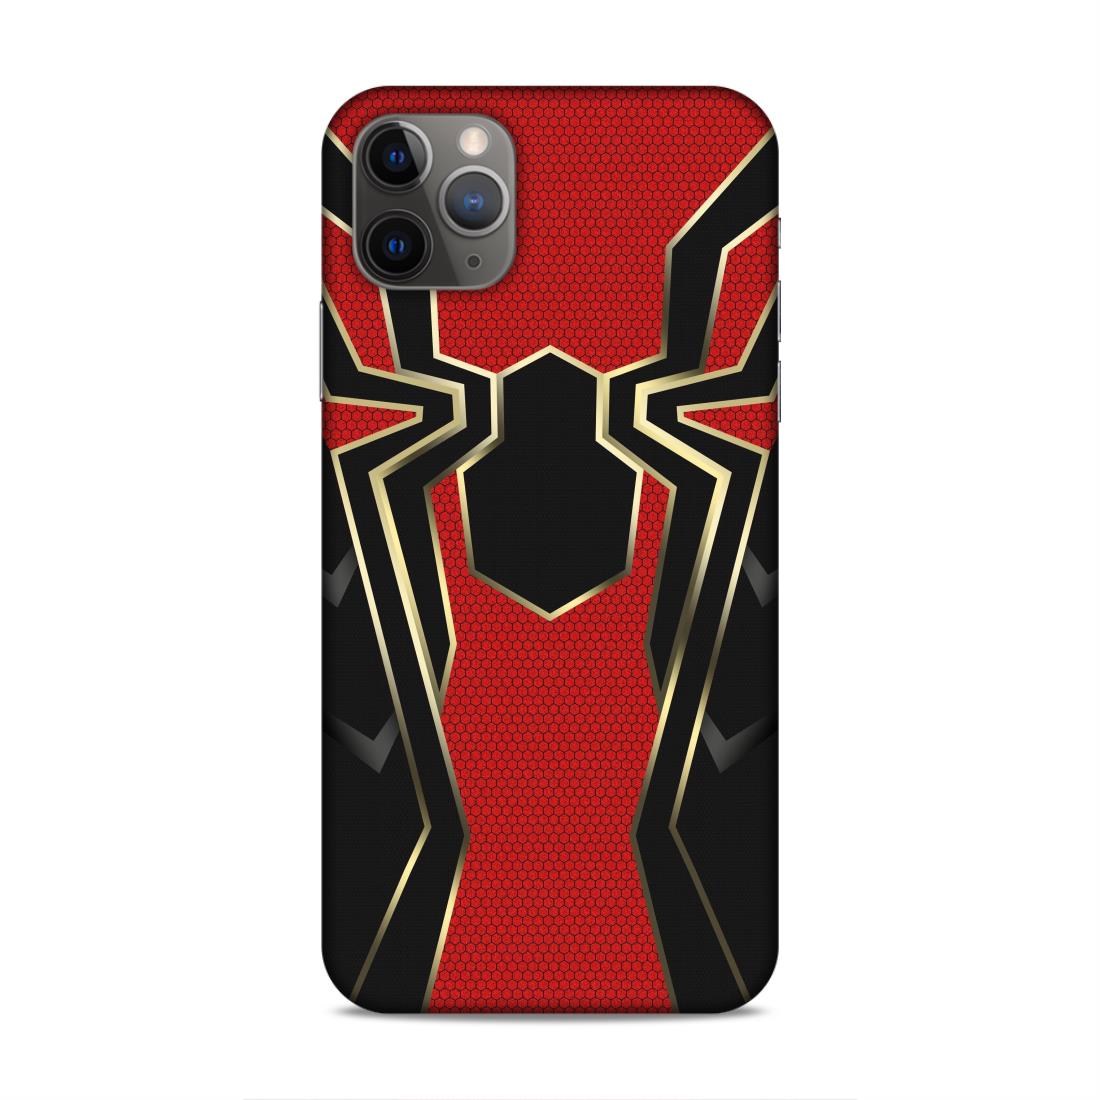 Spiderman Shuit Hard Back Case For Apple iPhone 11 Pro Max